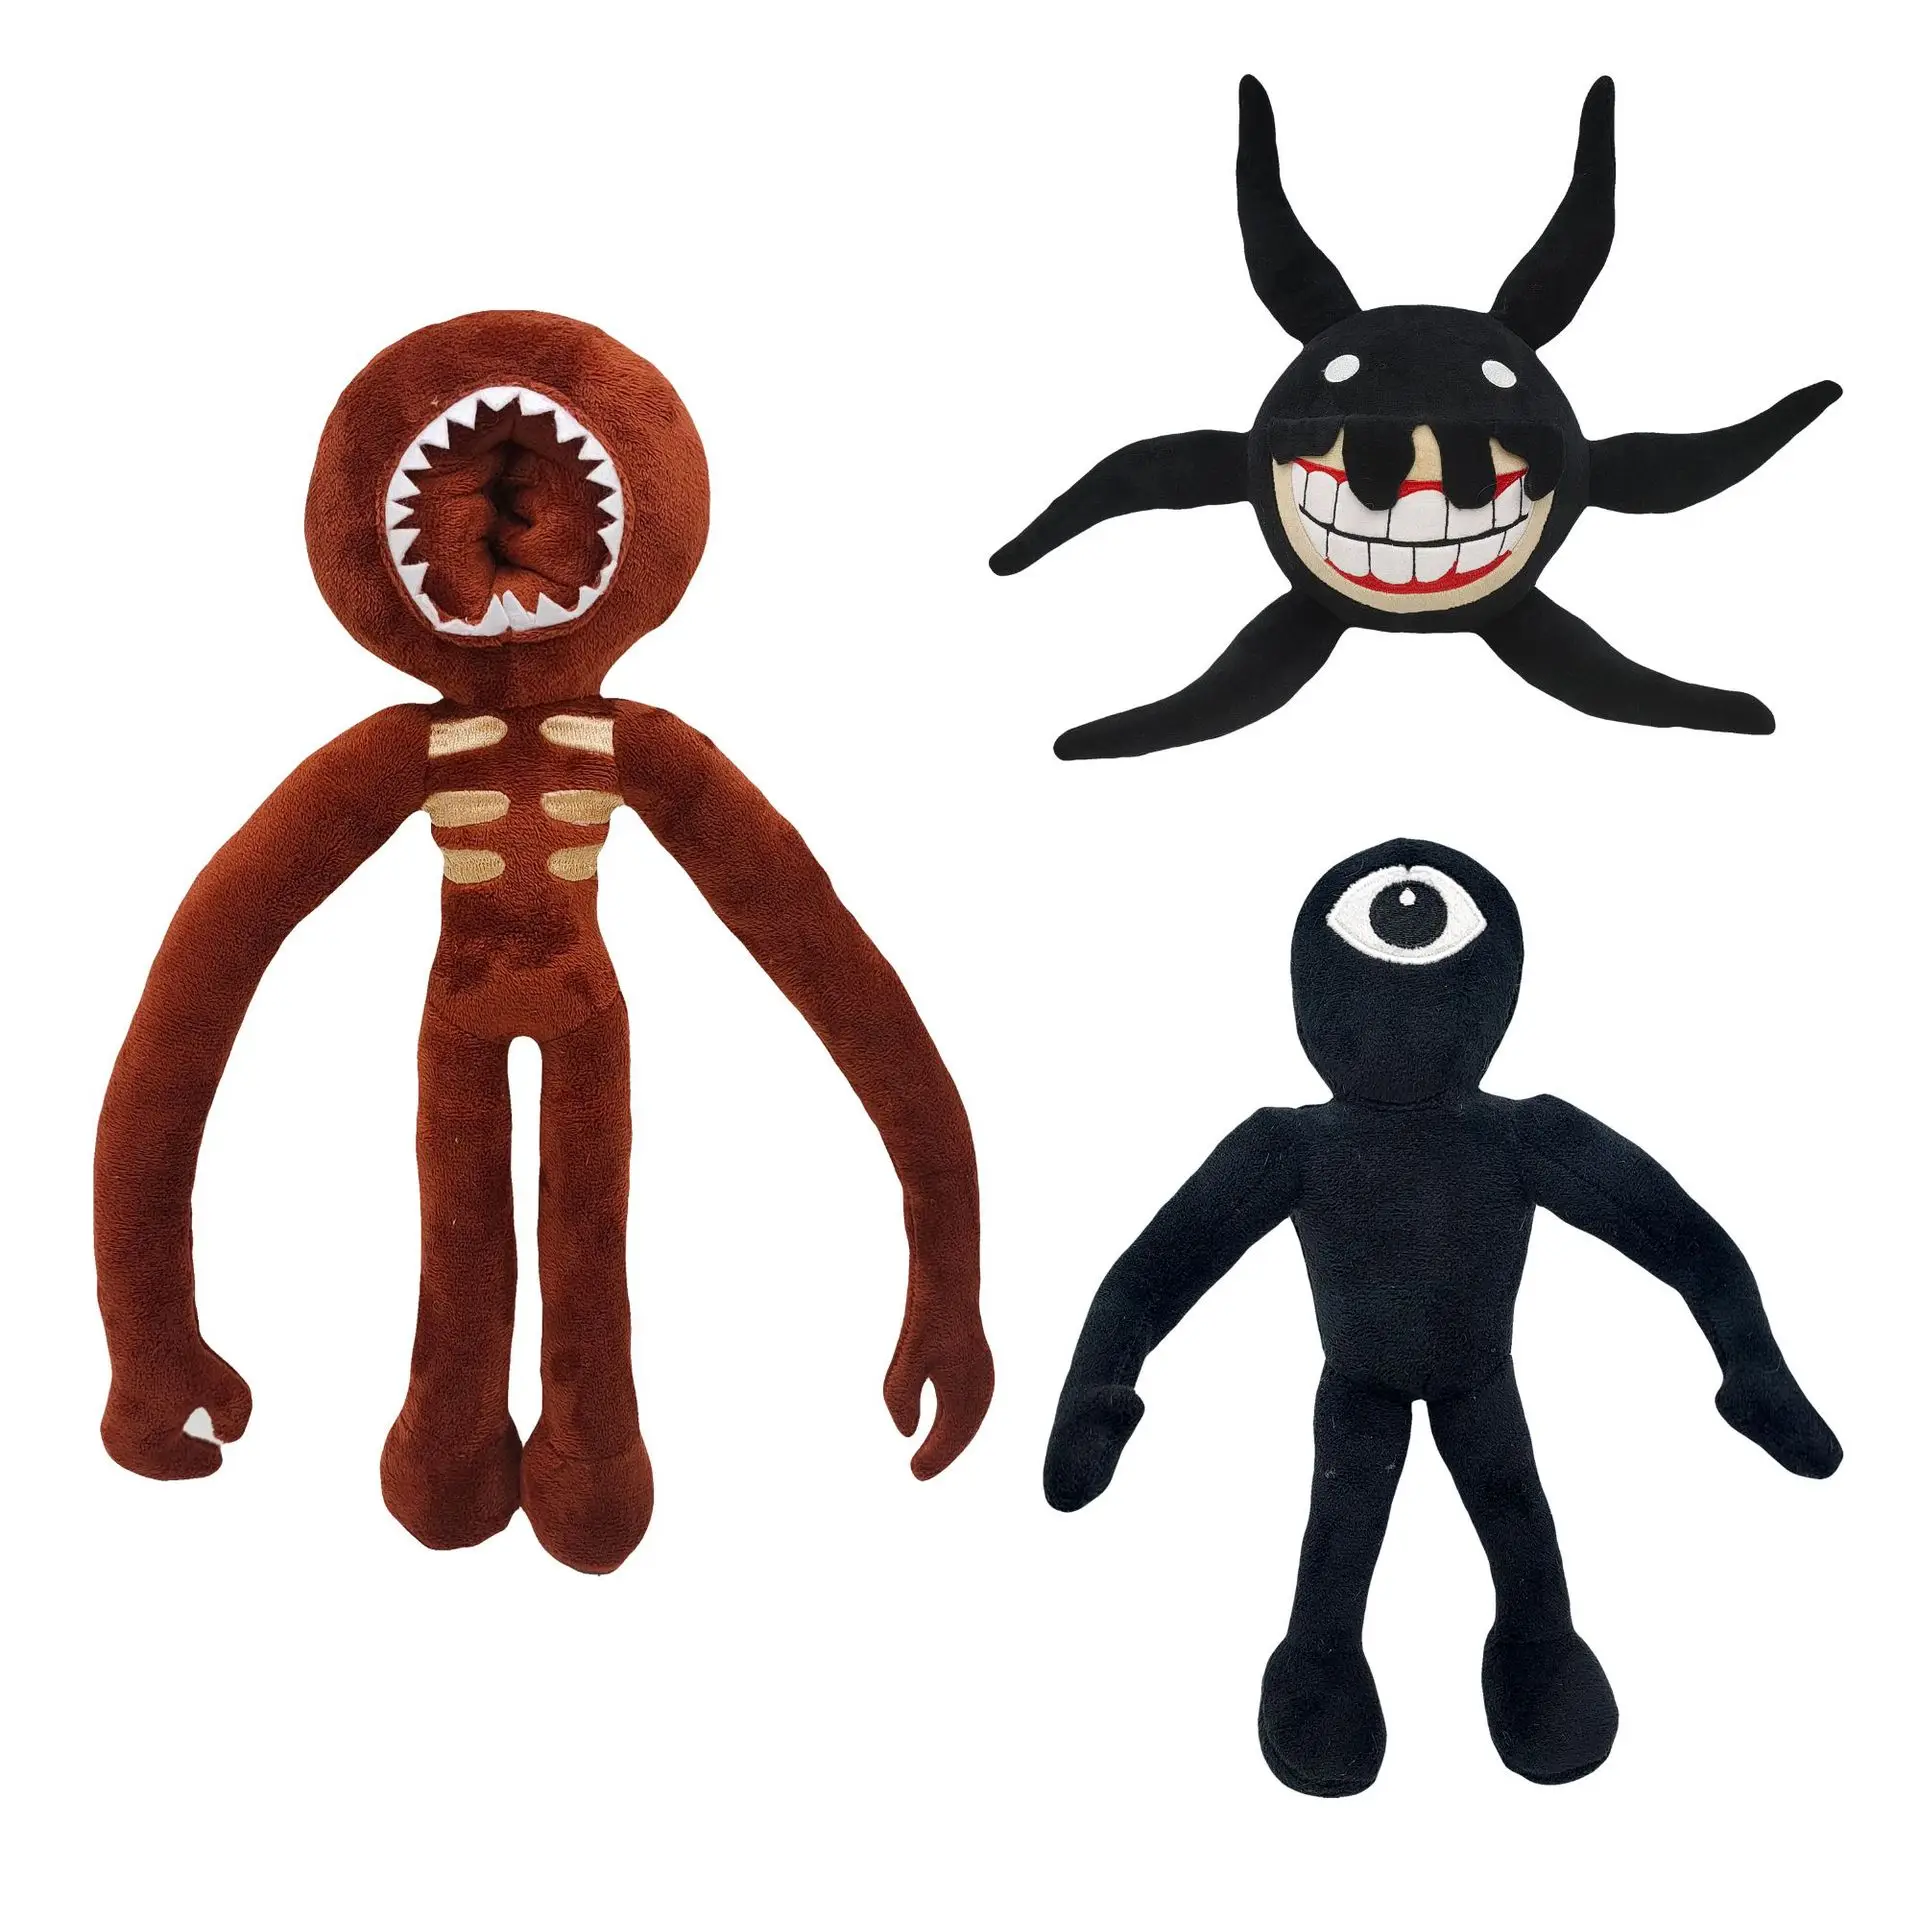 11 Pieces) Door Roblox Character Plush Doll Game Peripheral Plush